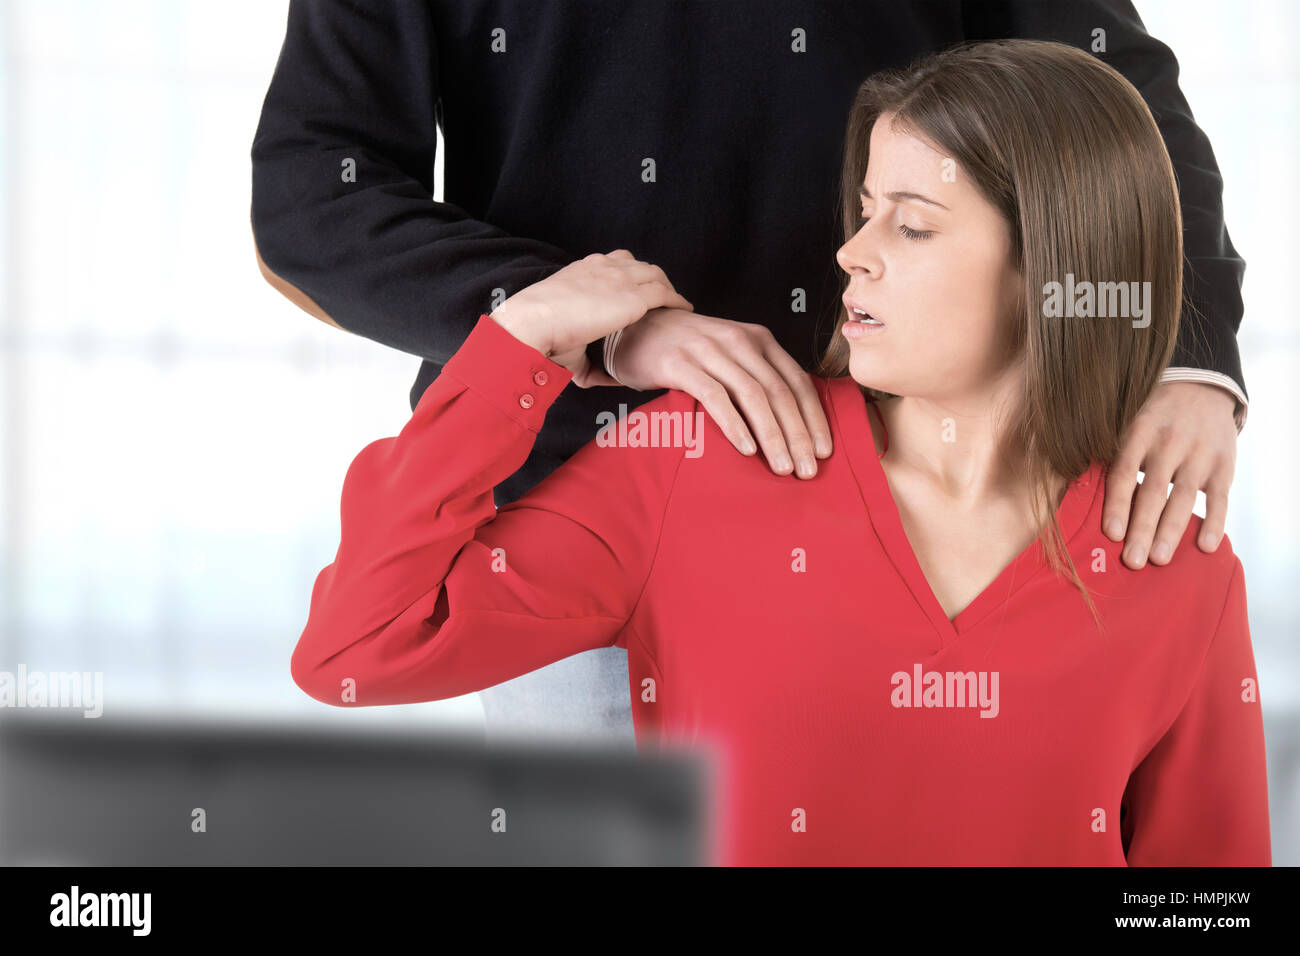 Woman suffering from sexual harassment in the workplace Stock Photo